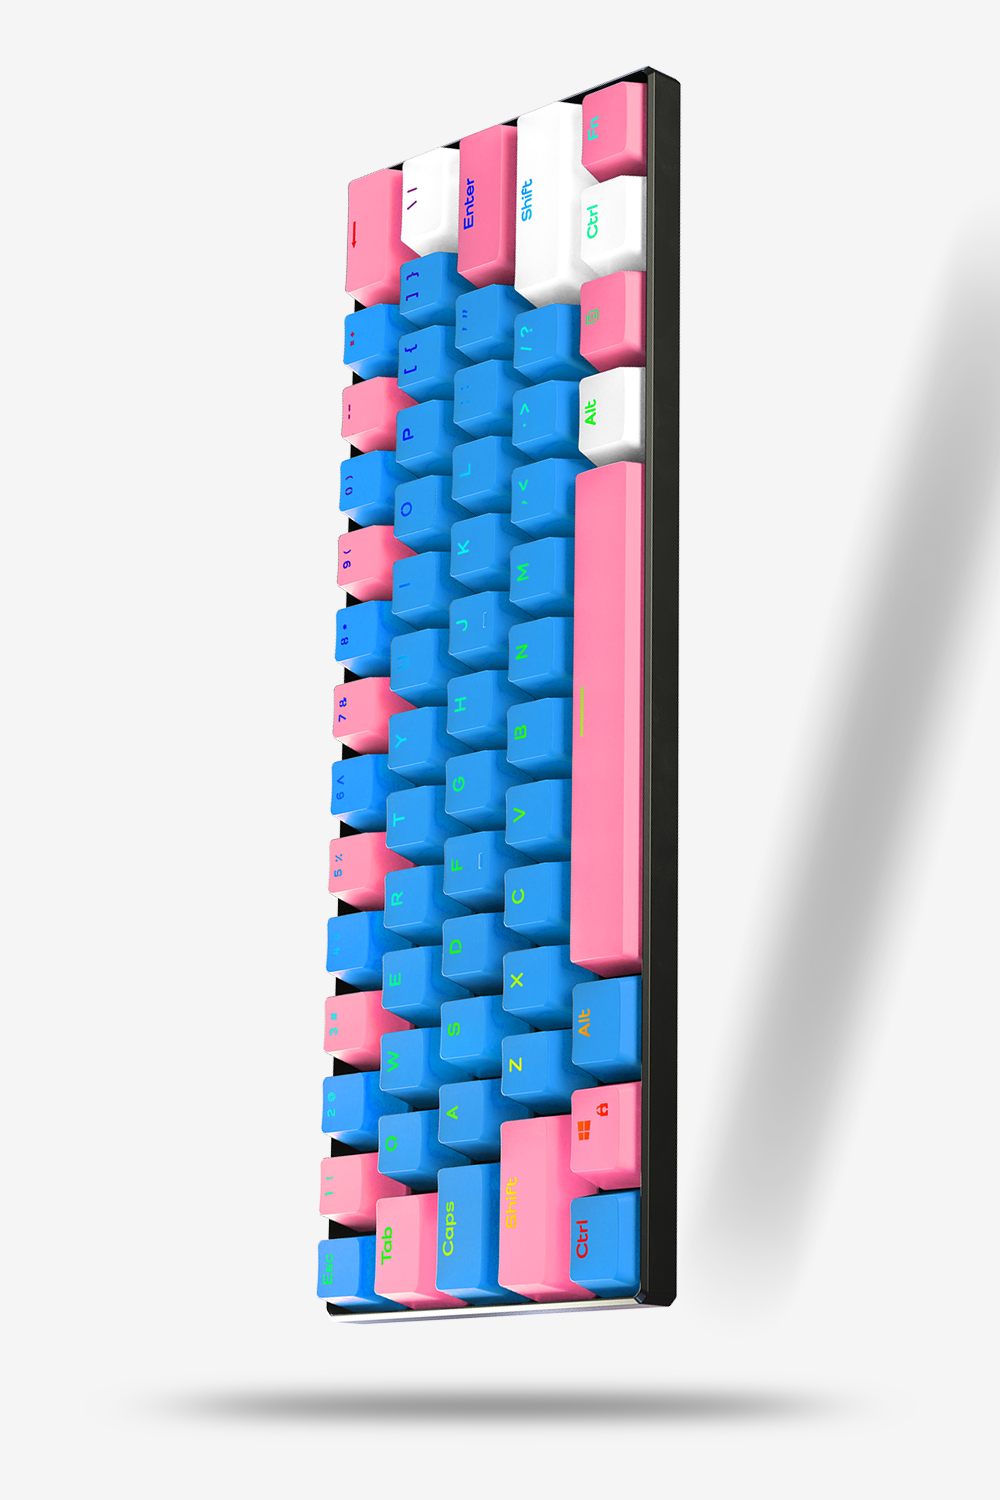 cotton candy - Gaming Keyboards